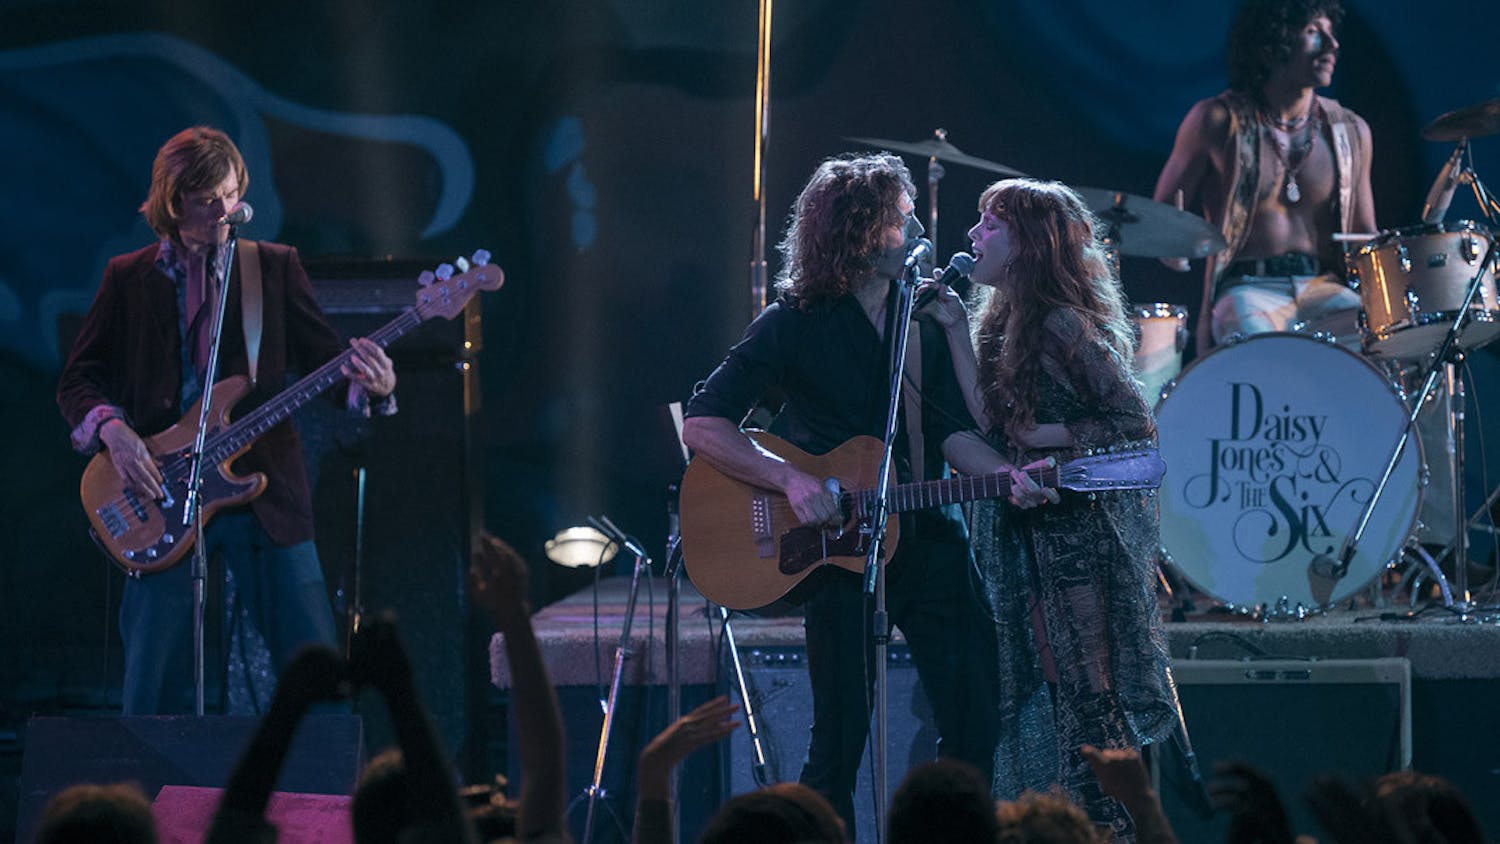 Sam Claflin (center) and Riley Keough (right) sing together during a scene from the drama miniseries, &nbsp;"Daisy Jones &amp; The Six." The series is a live-action adaptation of American author Taylor Jenkins Reid's novel by the same name, and it follows the lives of a fictional 1970s rock band from the perspective of their older selves.&nbsp;